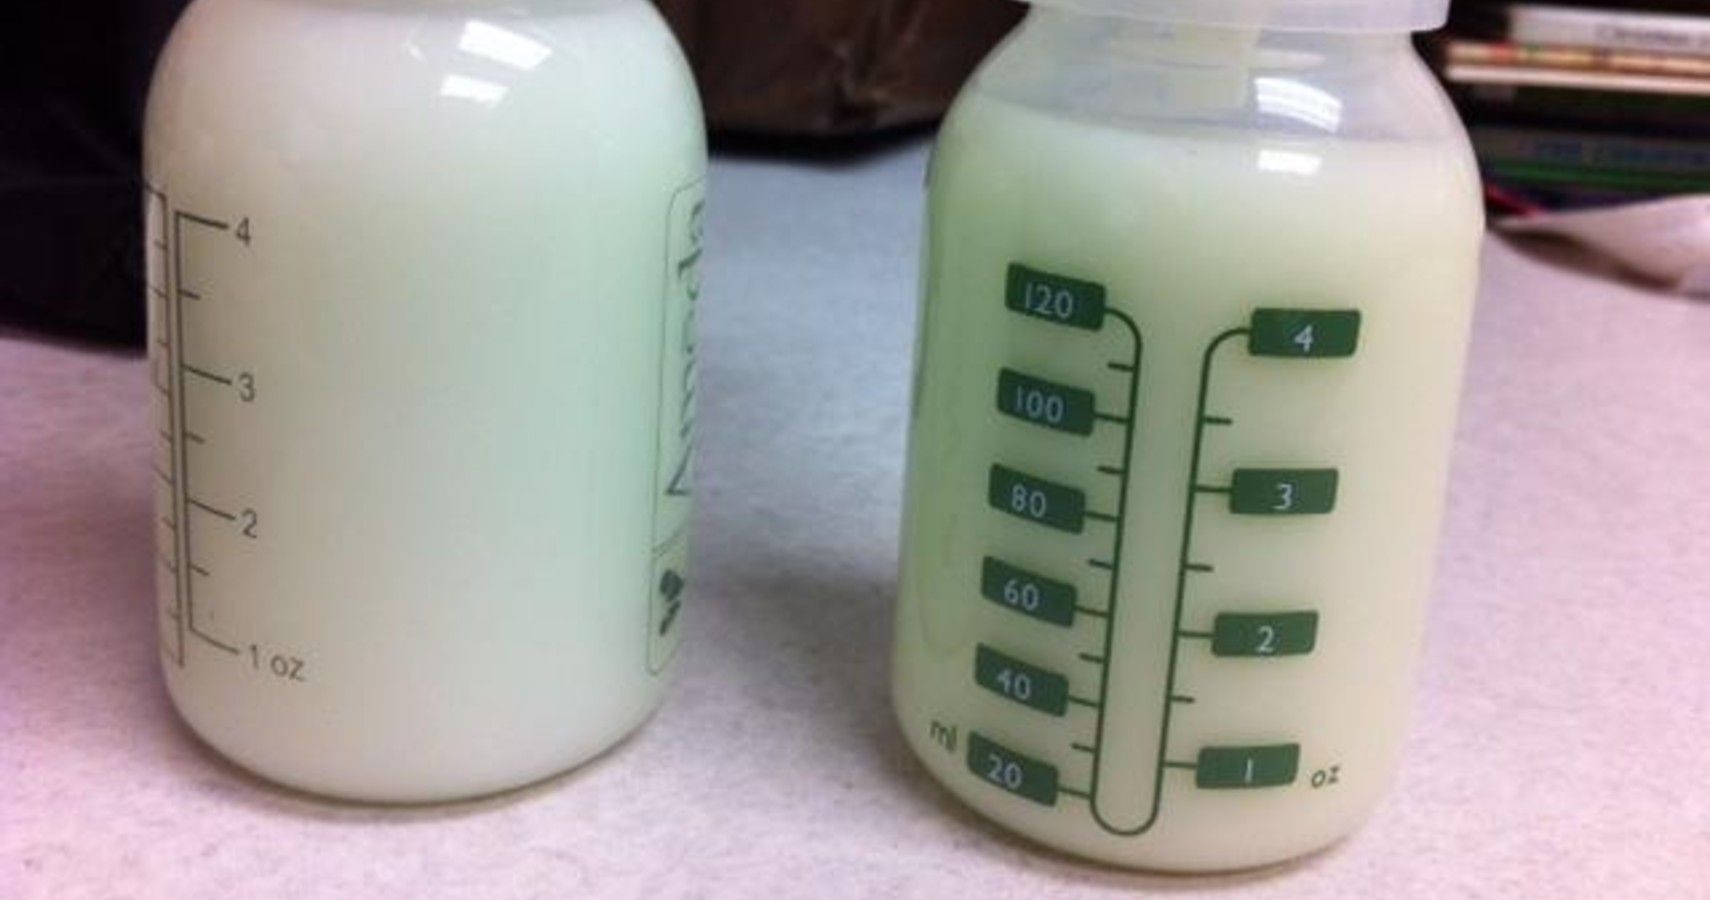 Parents Seeking Breast Milk With COVID Antibodies, Experts Warn Against It